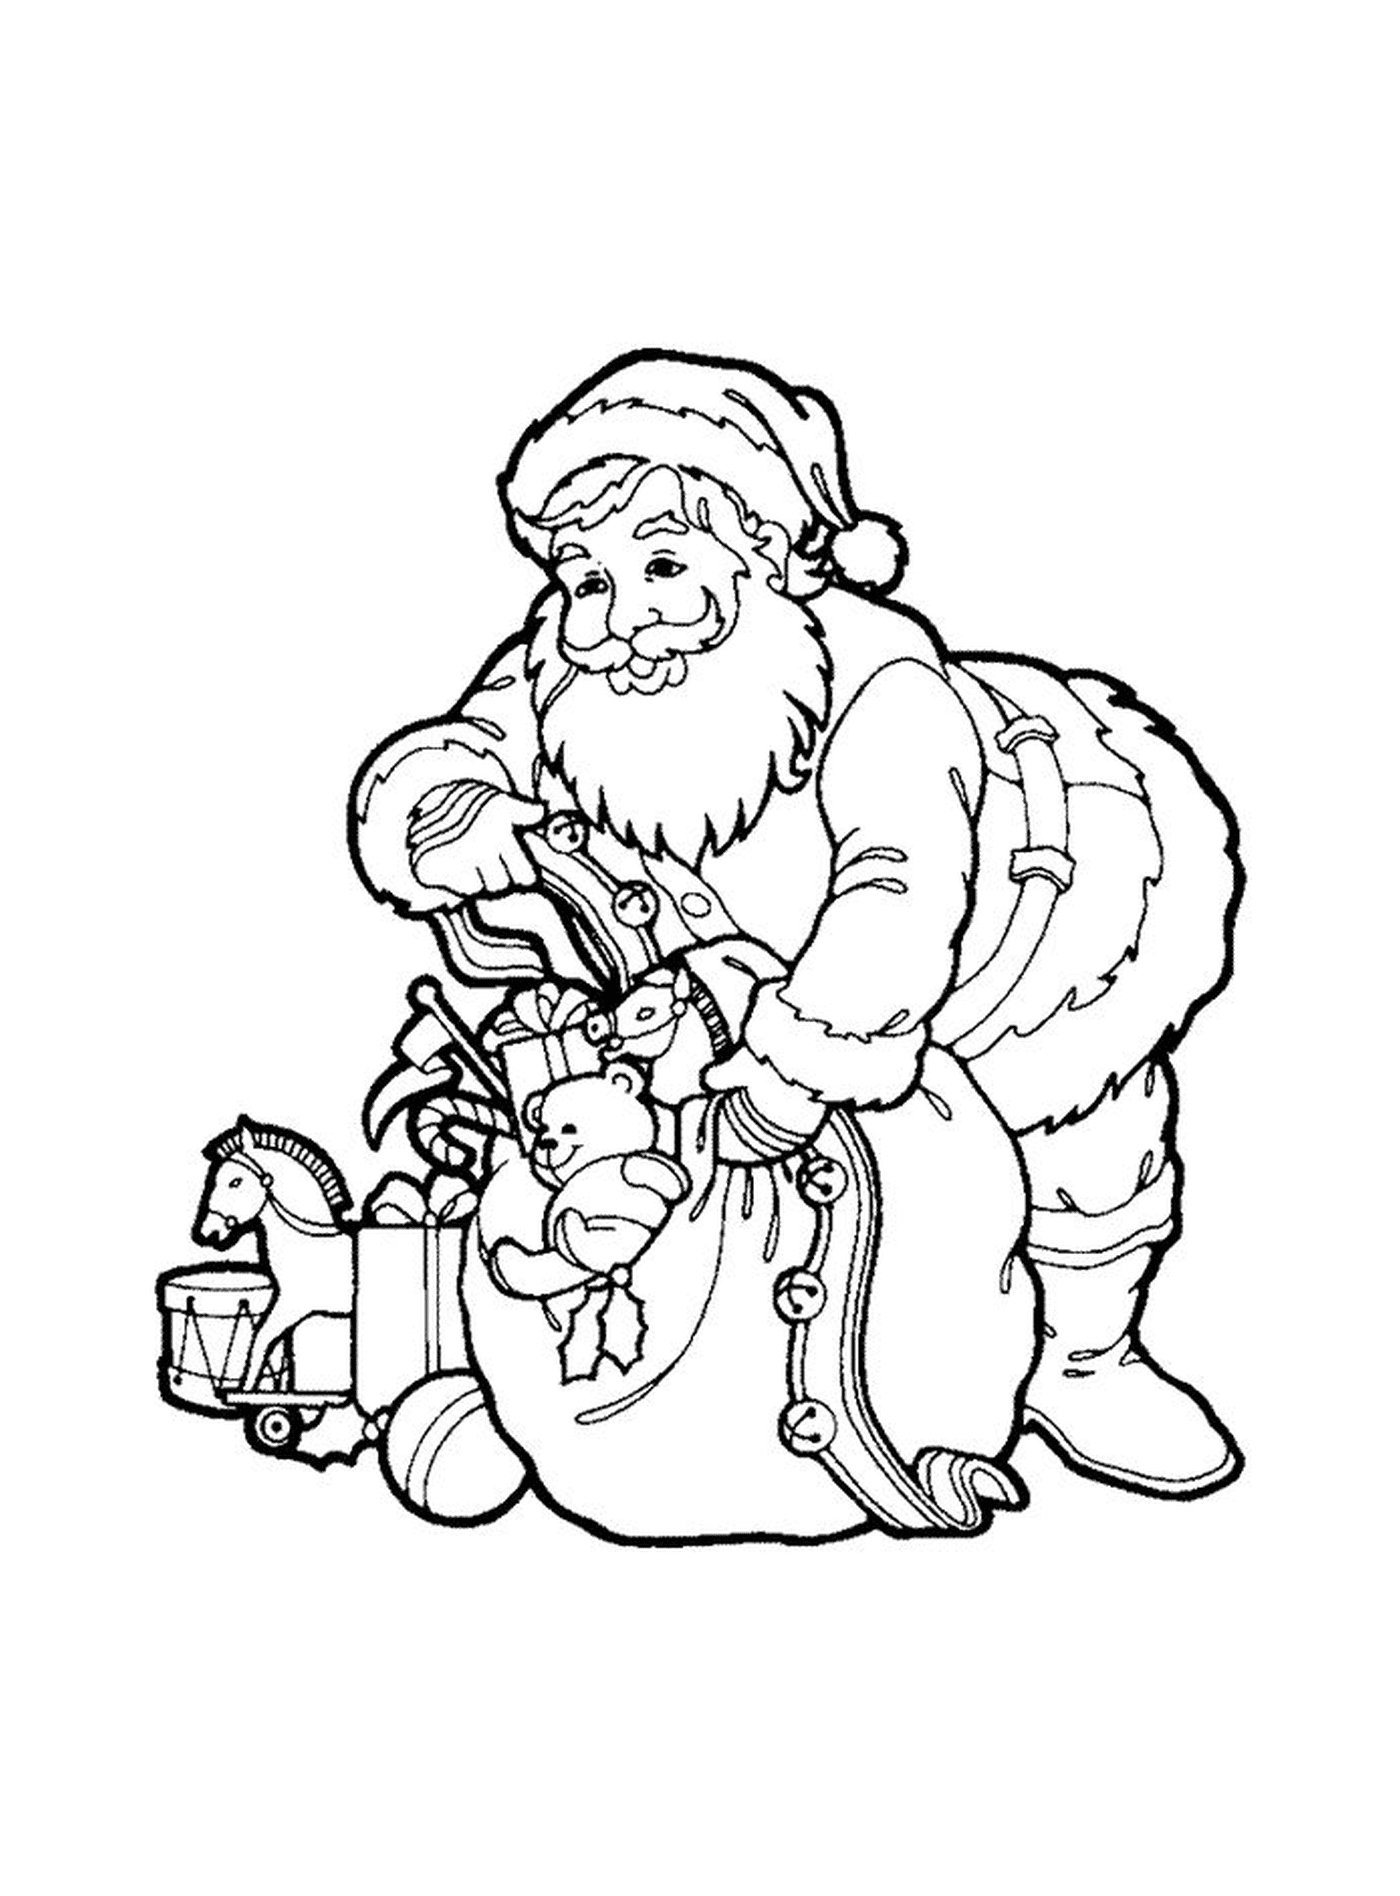  Santa with a bag of gifts 